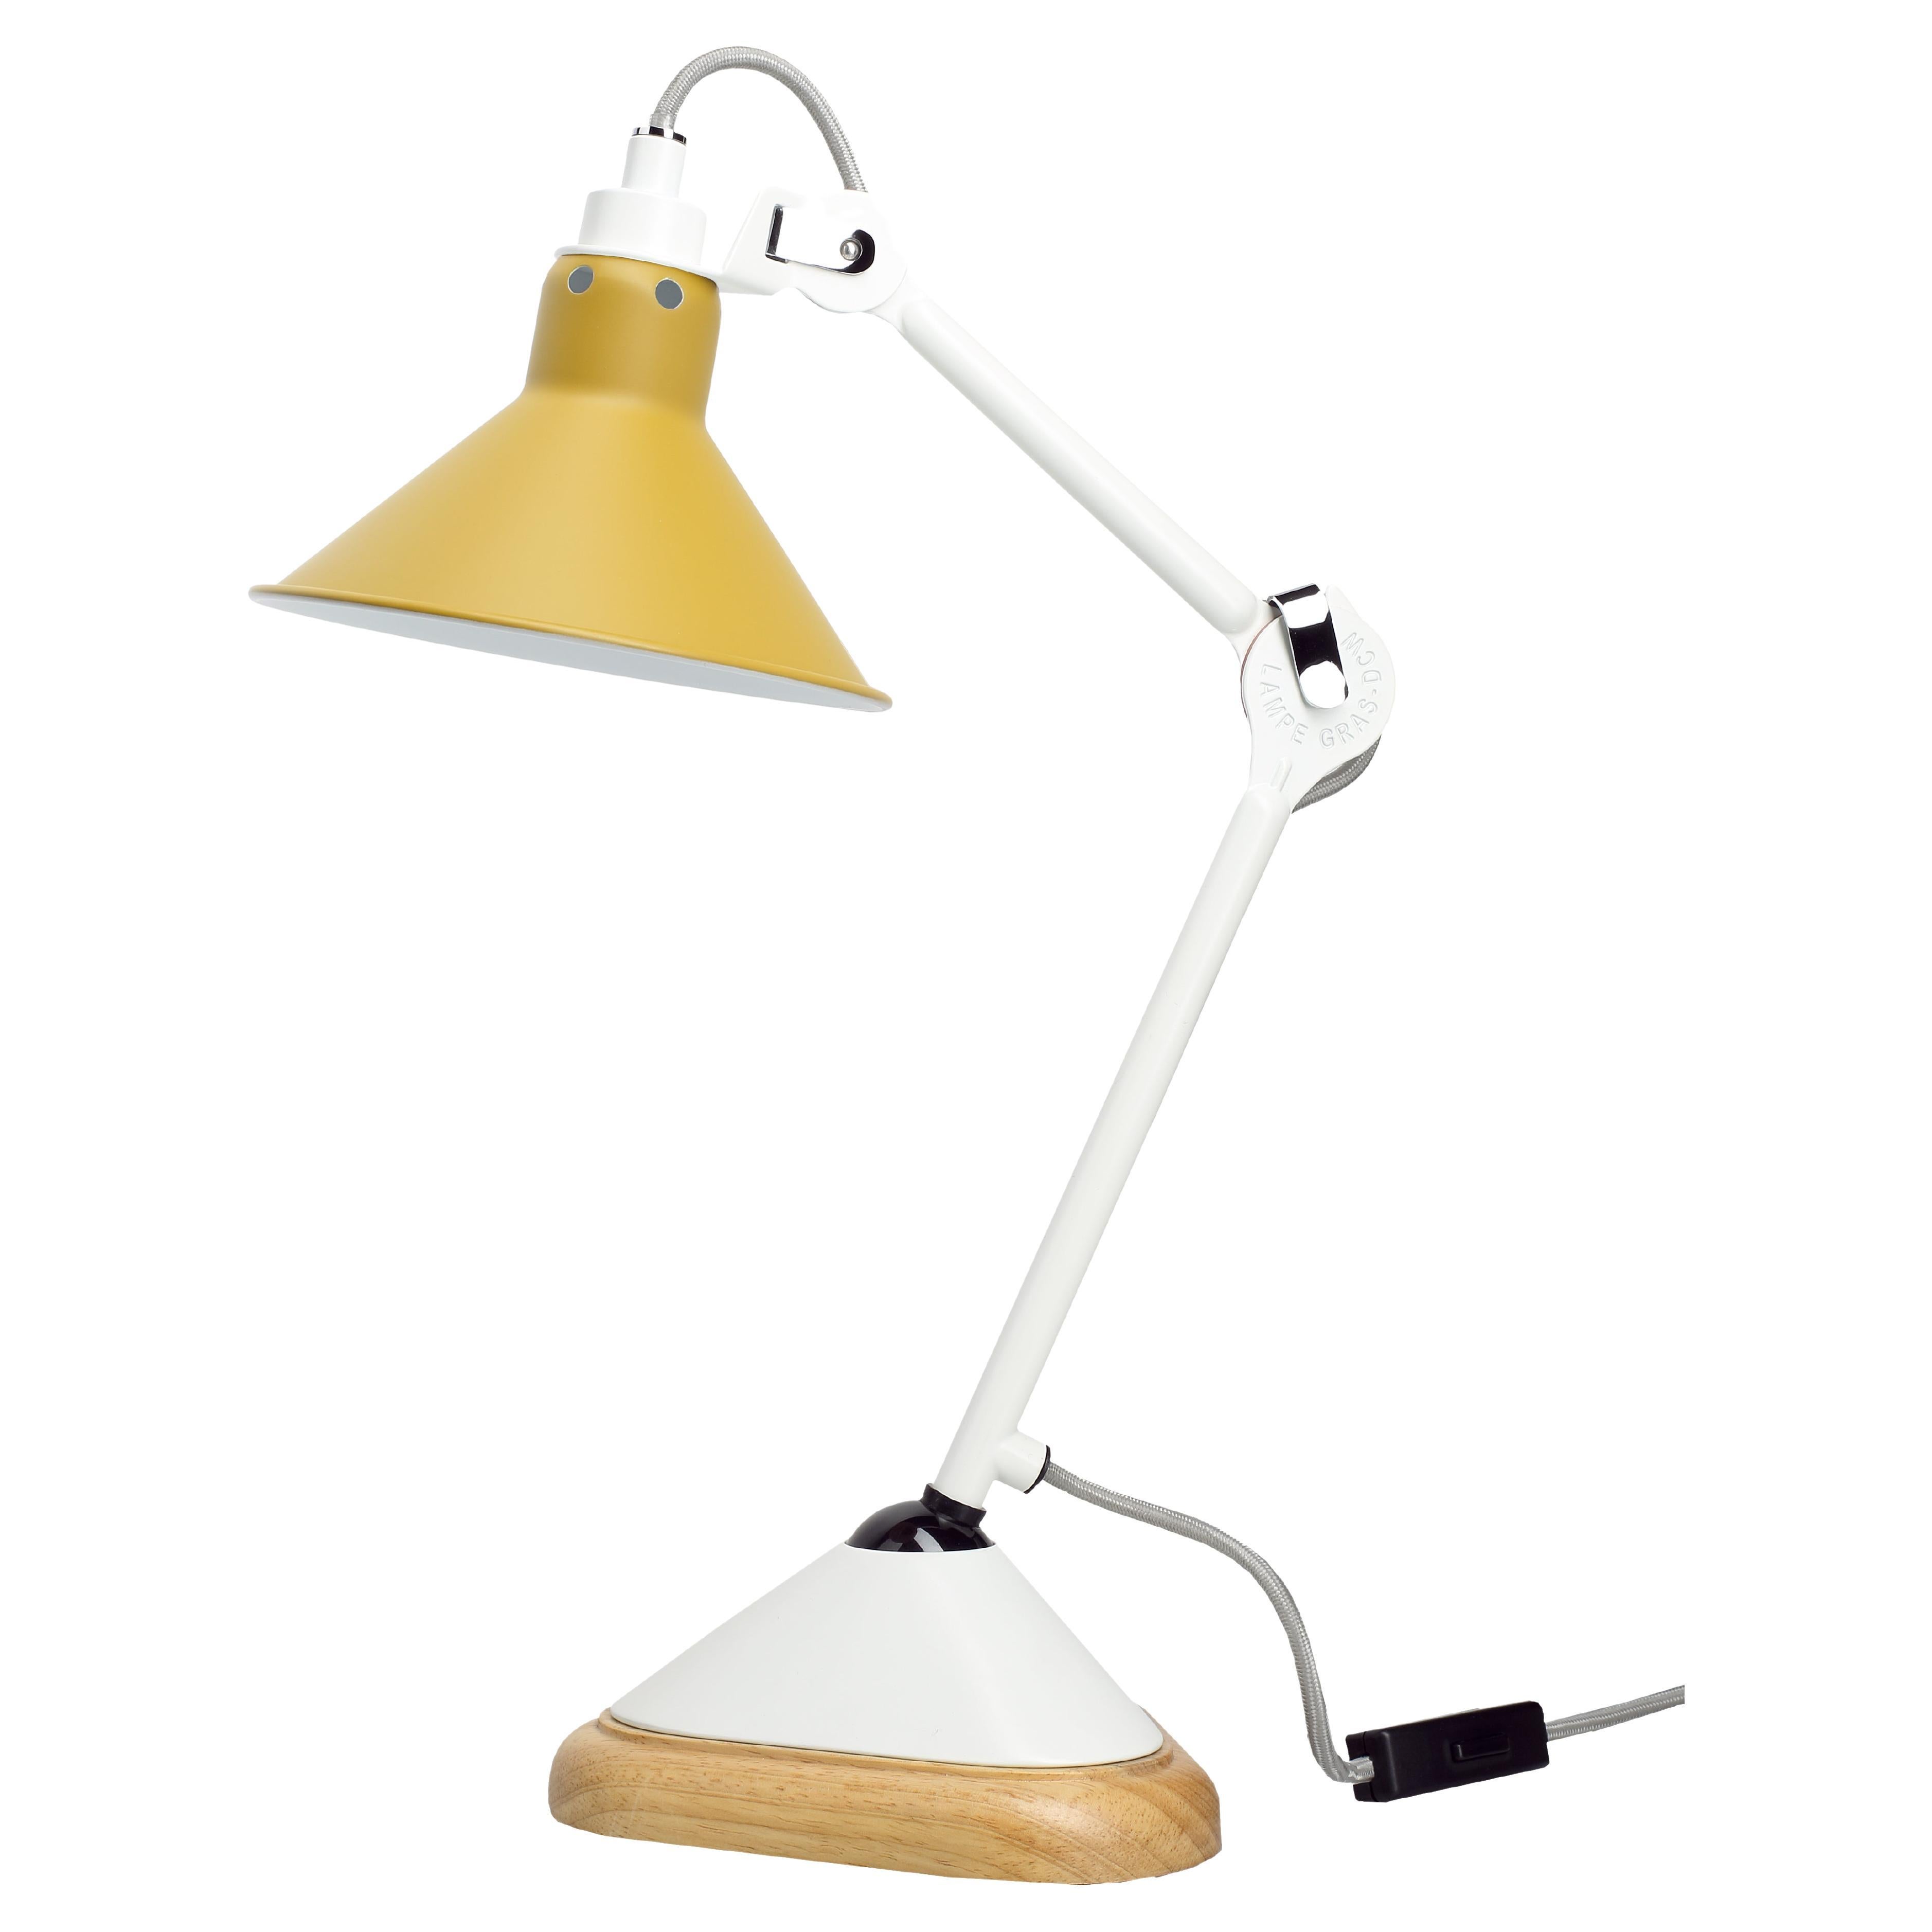 DCW Editions La Lampe Gras N°207 Conic Table Lamp in White Arm with Yellow Shade